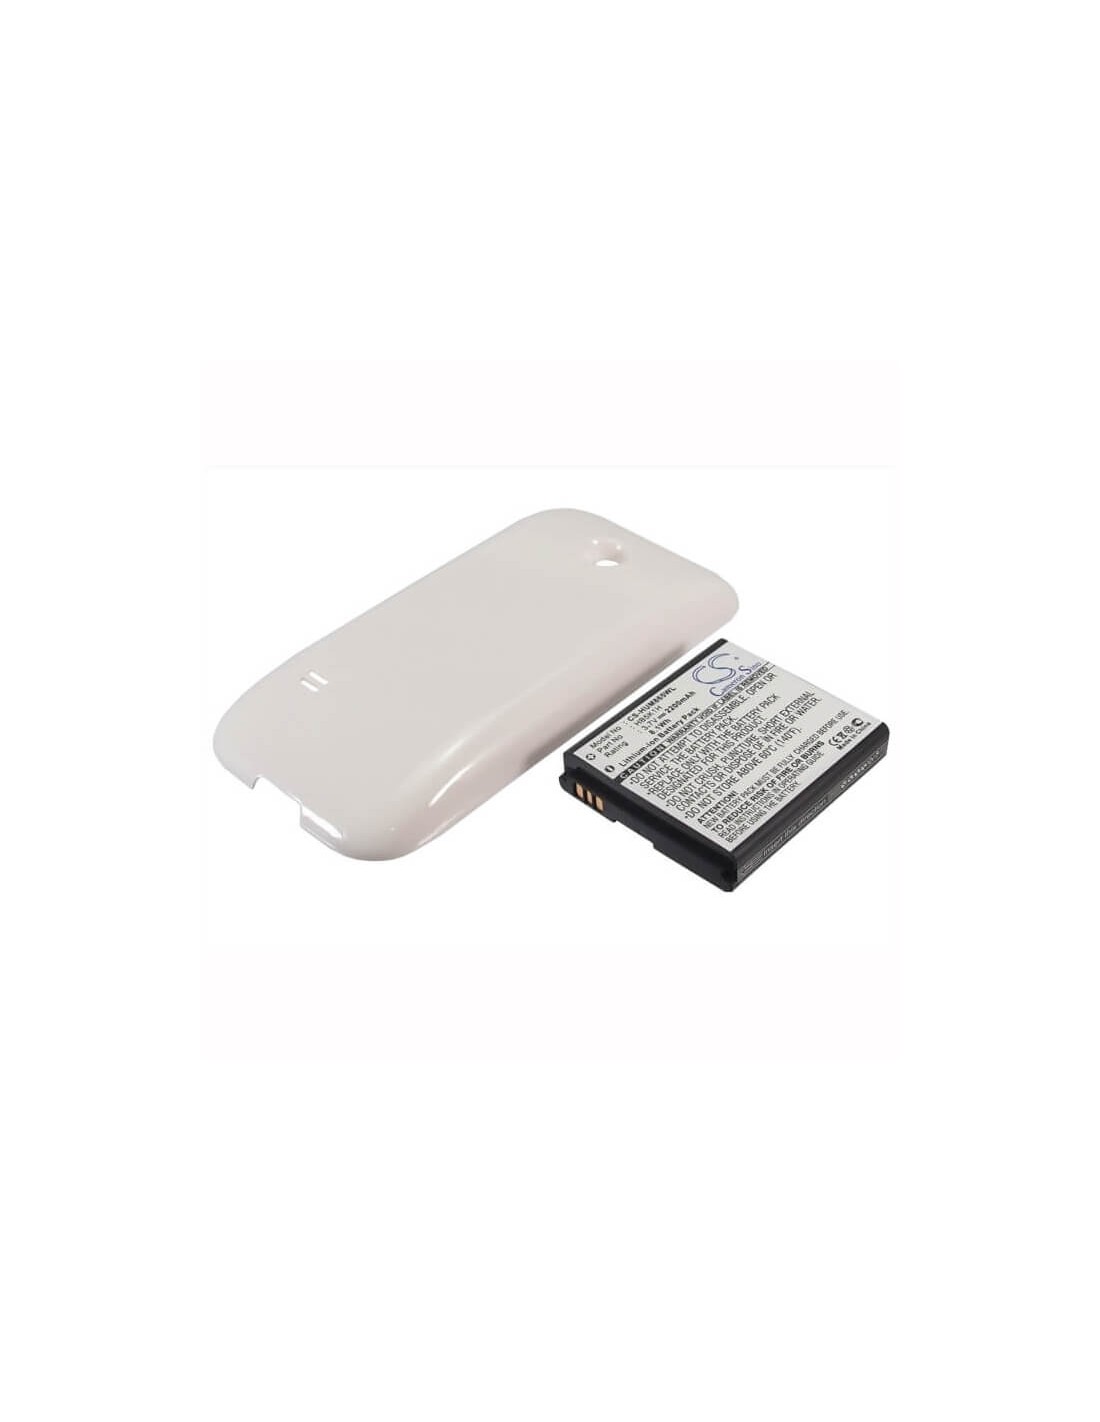 Battery for Huawei Sonic Ascend II, M865 white back cover 3.7V, 2200mAh - 8.14Wh